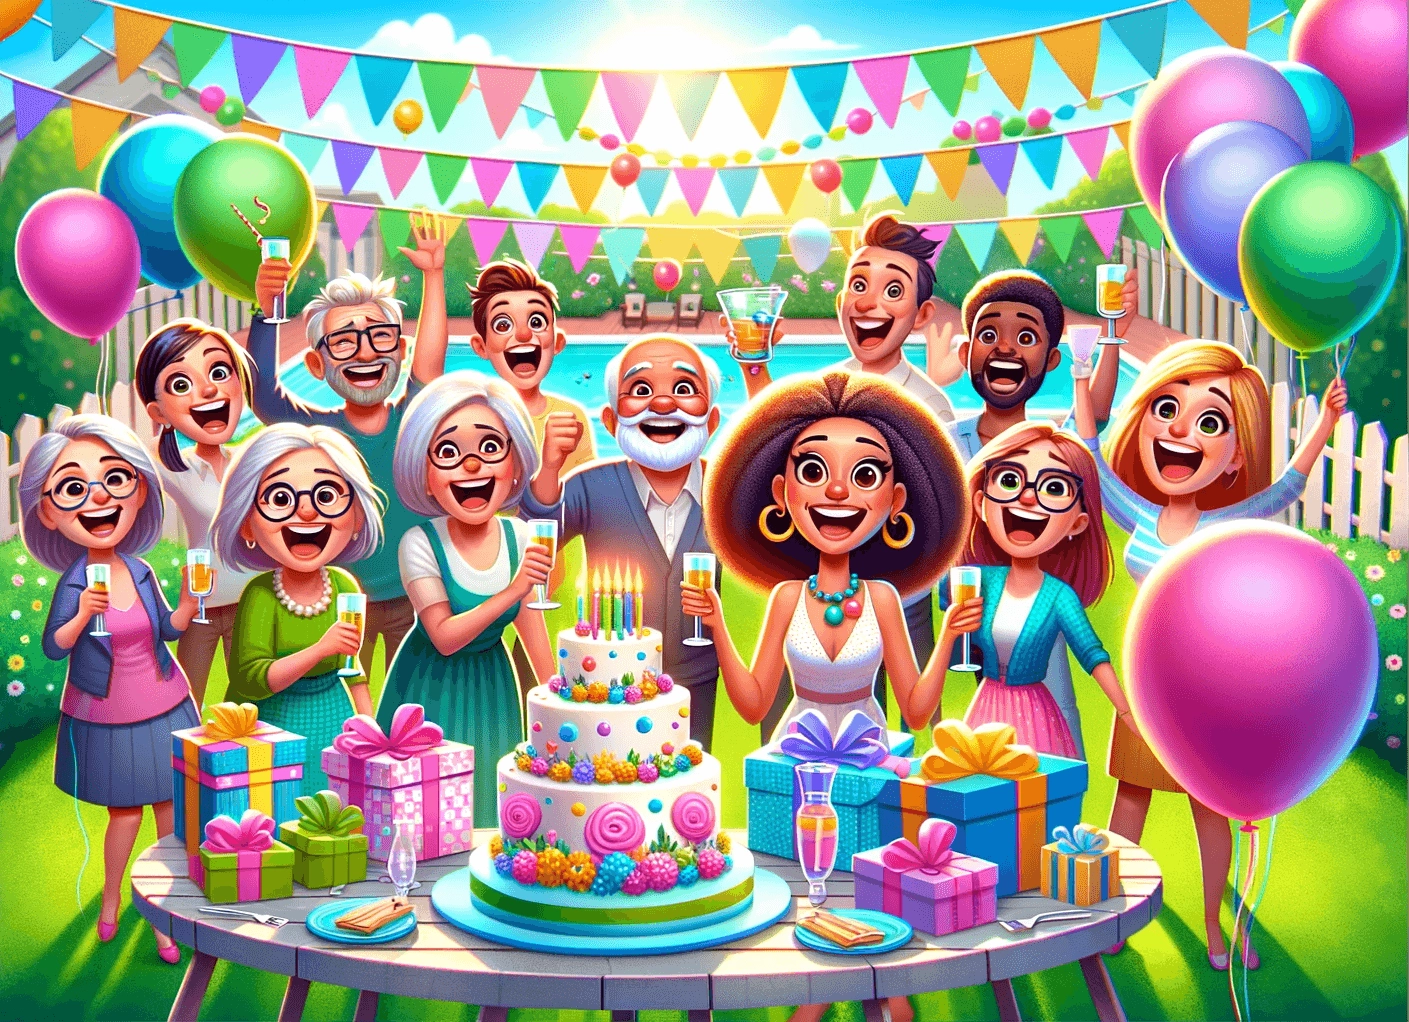 Graphic of partygoers at a surprise birthday party